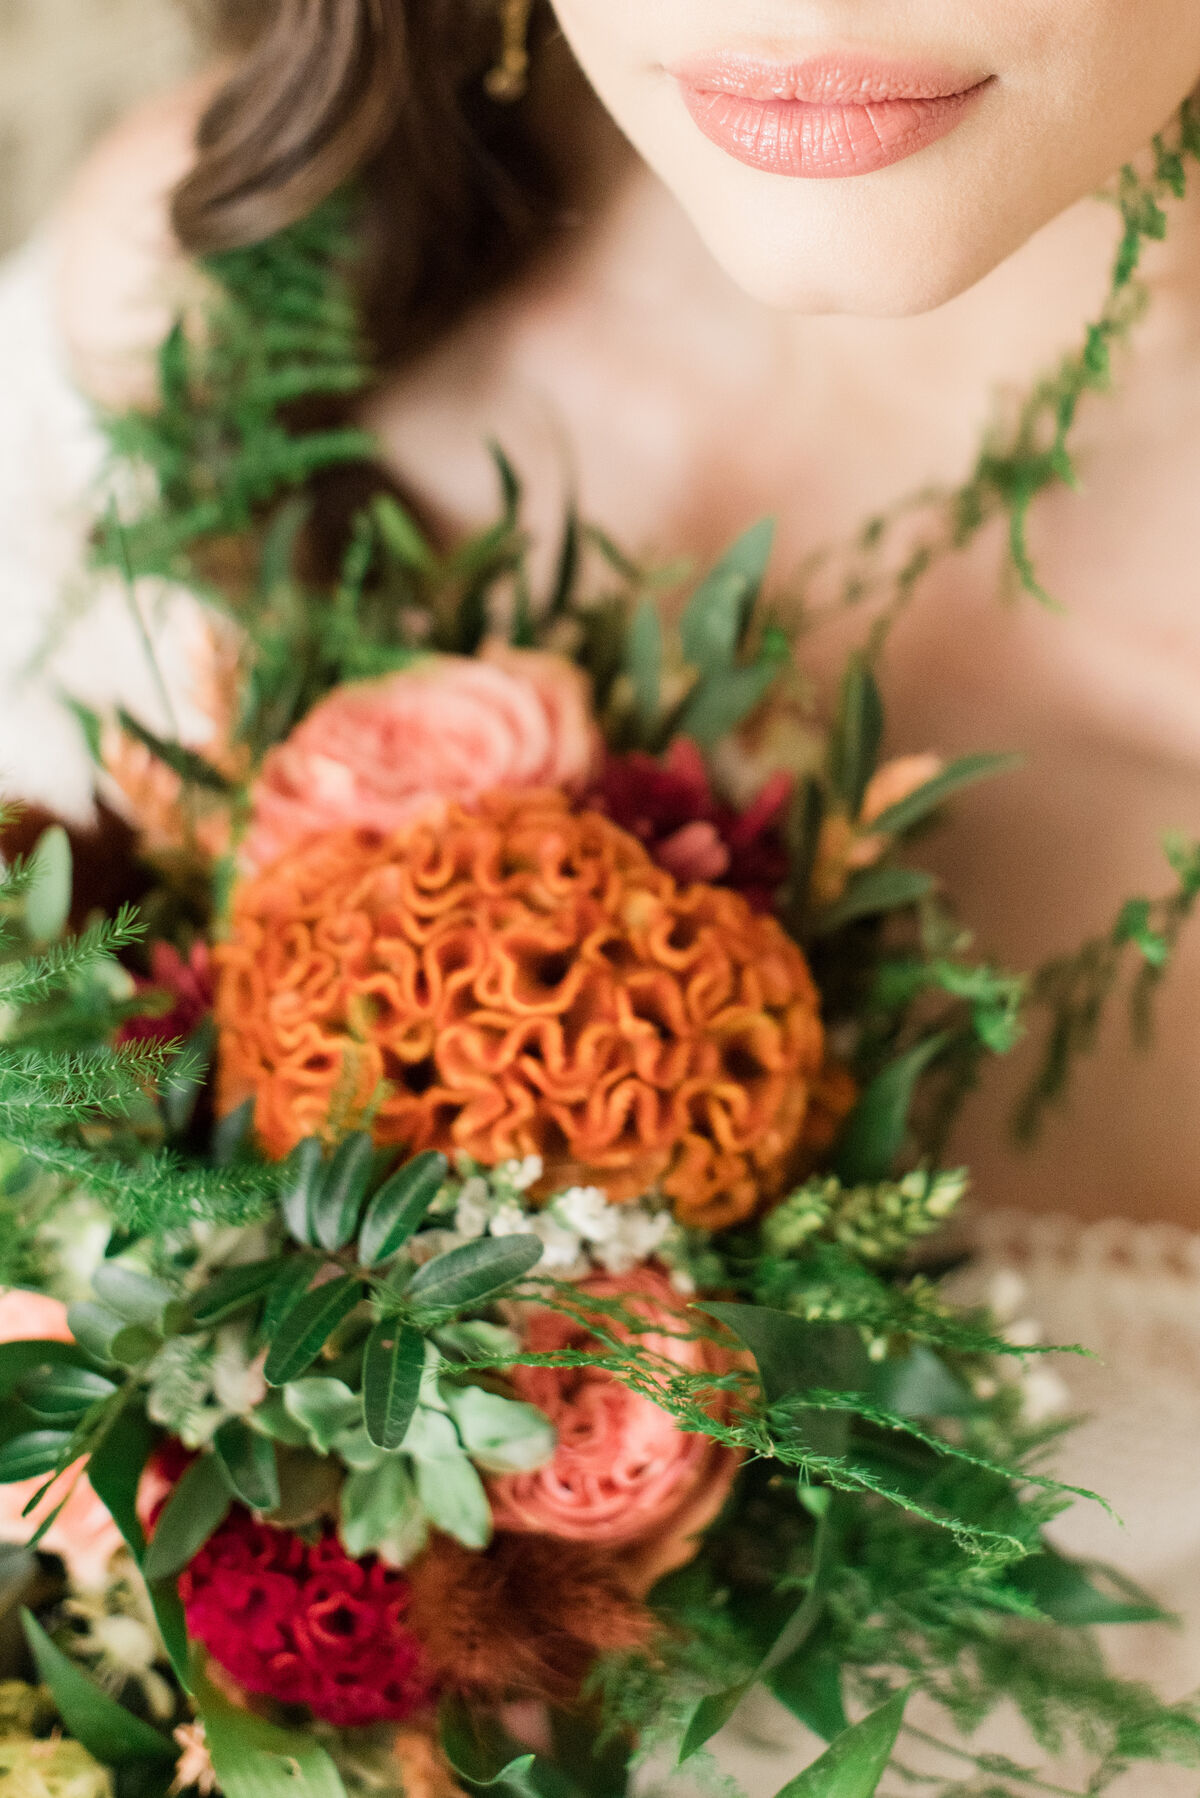 Laid-Back Elegance From A Brunch Wedding Inspiration Shoot In Athens